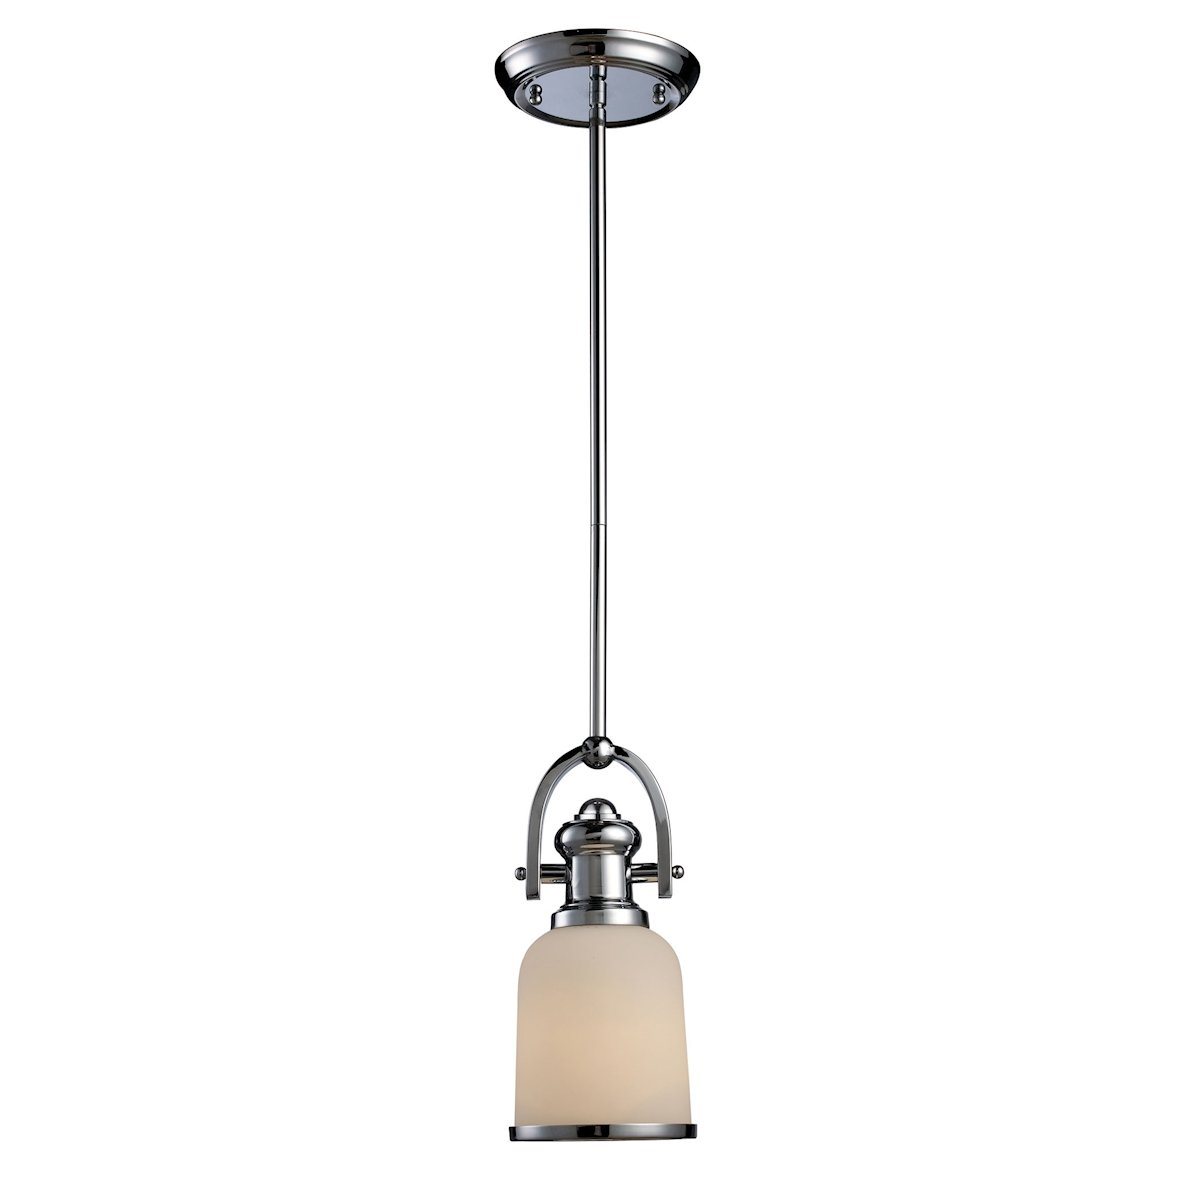 Brooksdale Mini Pendant In Polished Chrome And White Glass Ceiling Elk Lighting 